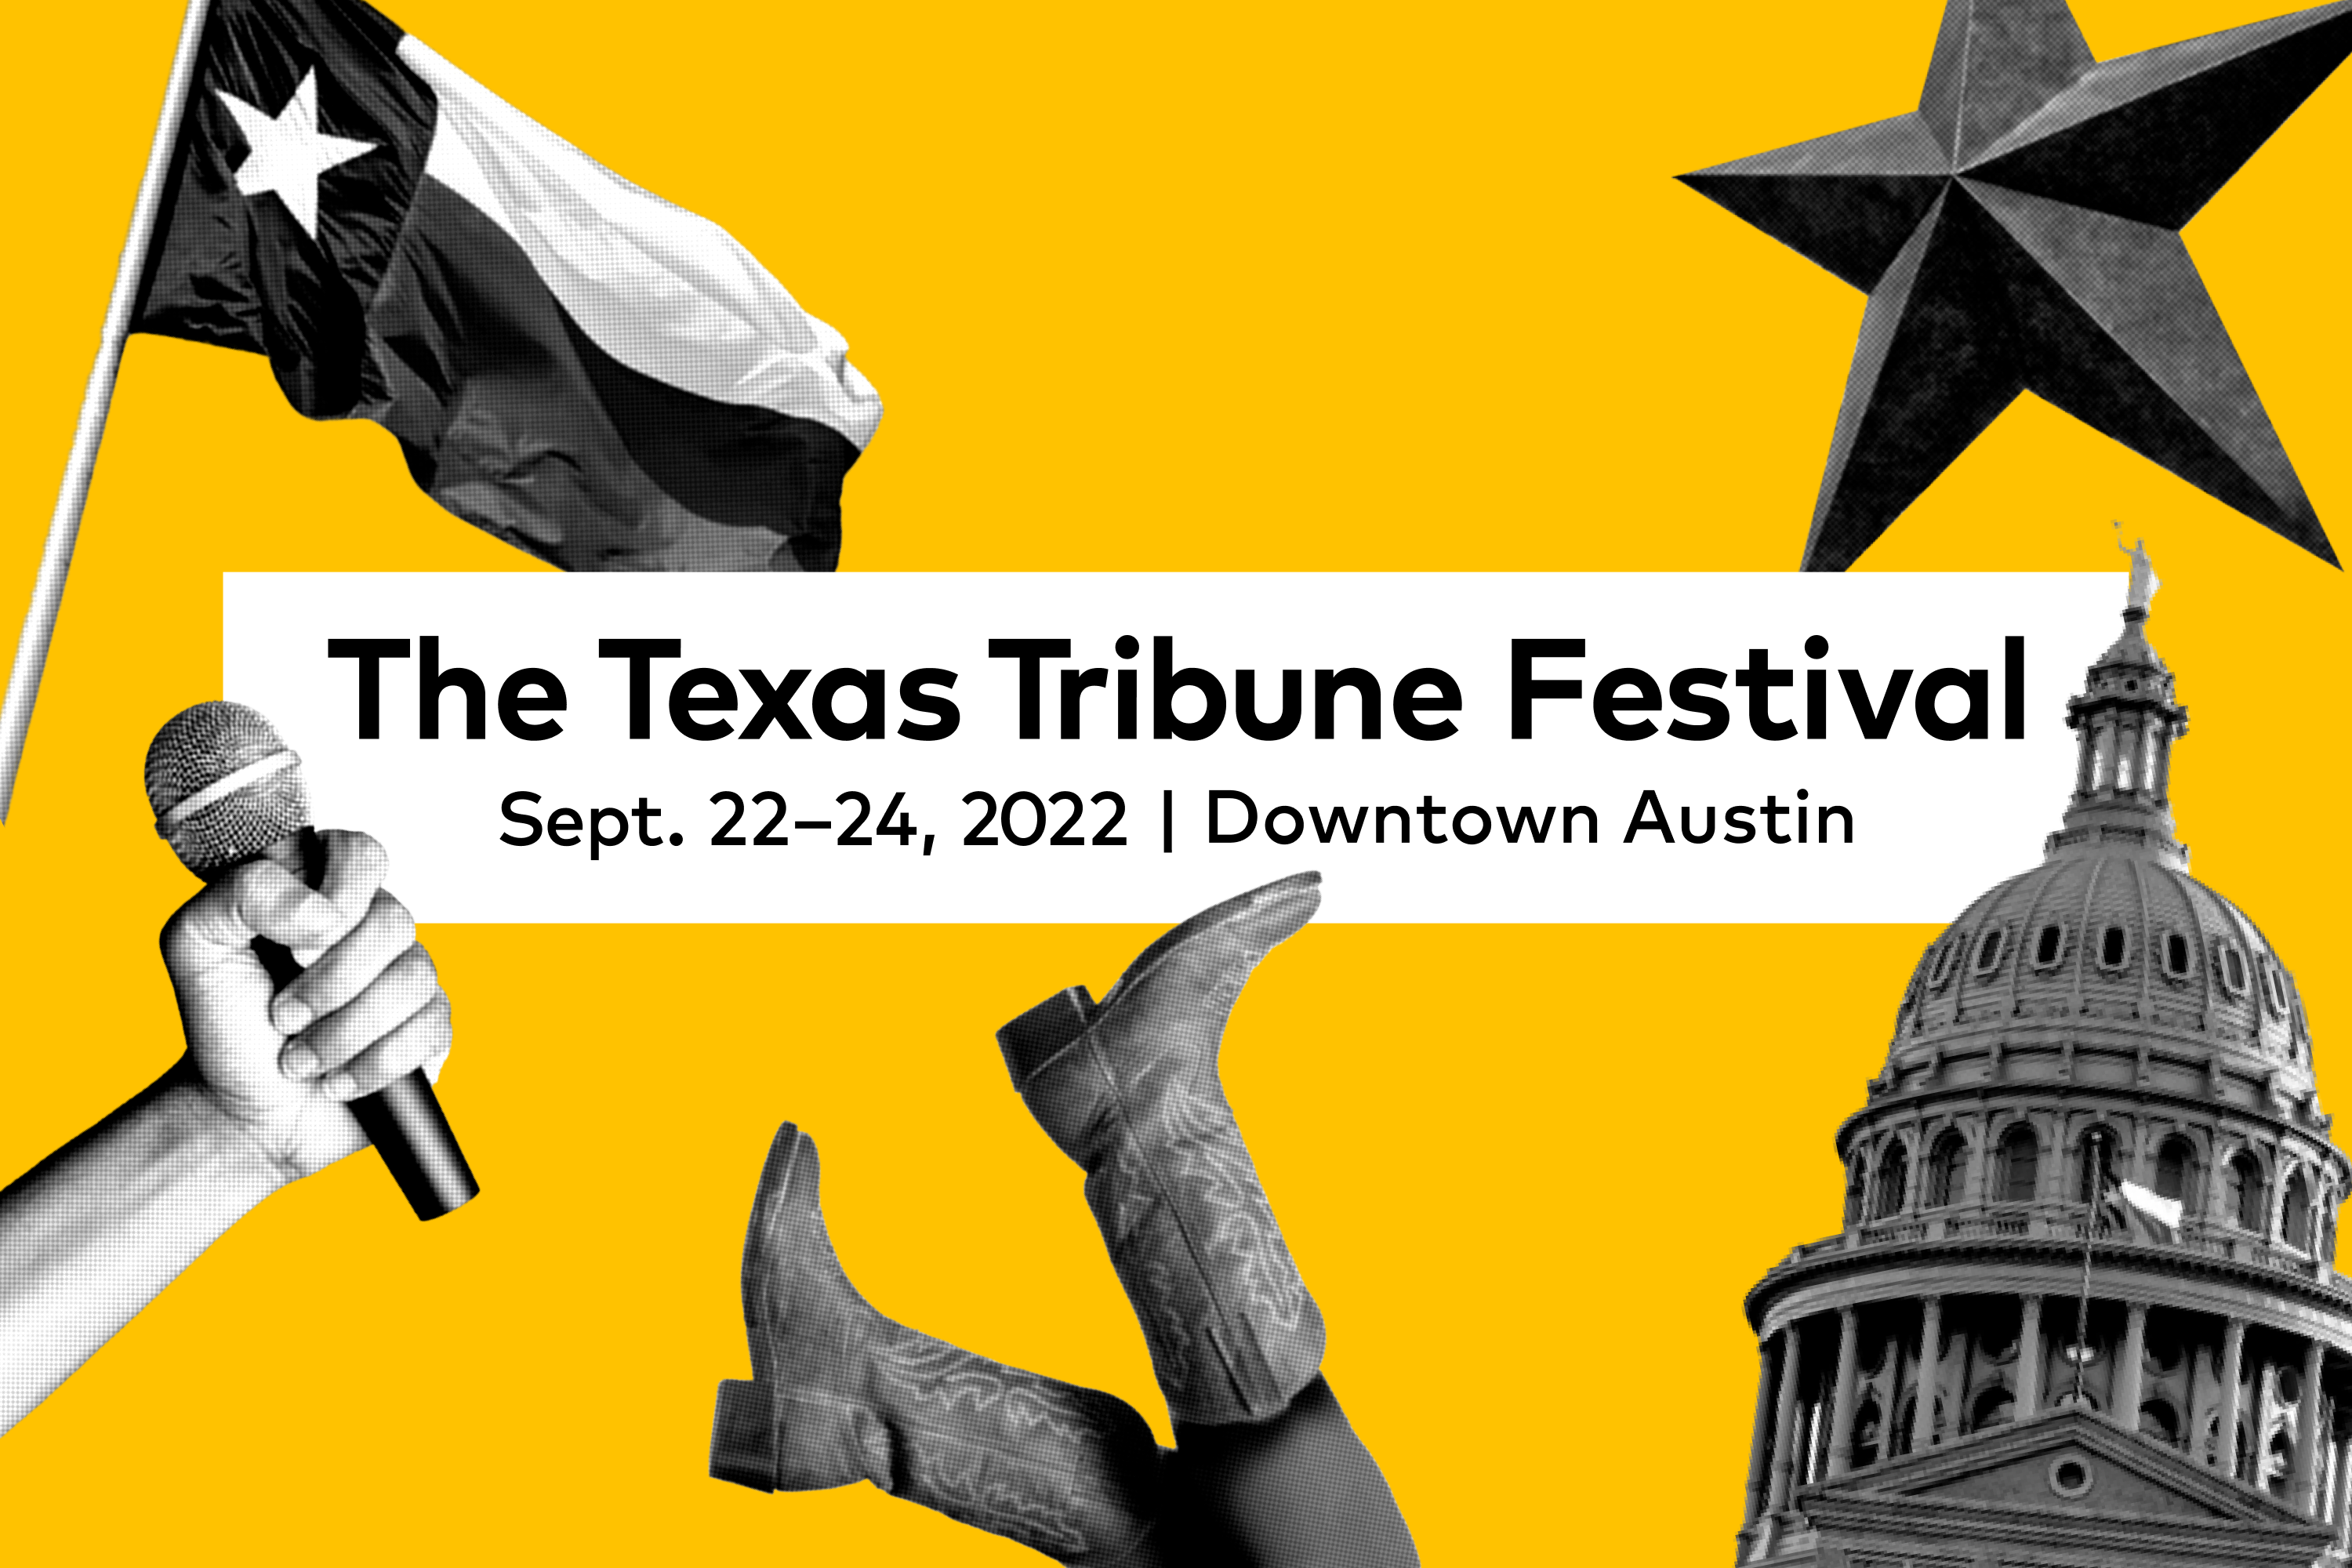 Event art for the Texas Tribune Festival, which runs form Sept. 22-24, 2022 in downtown Austin